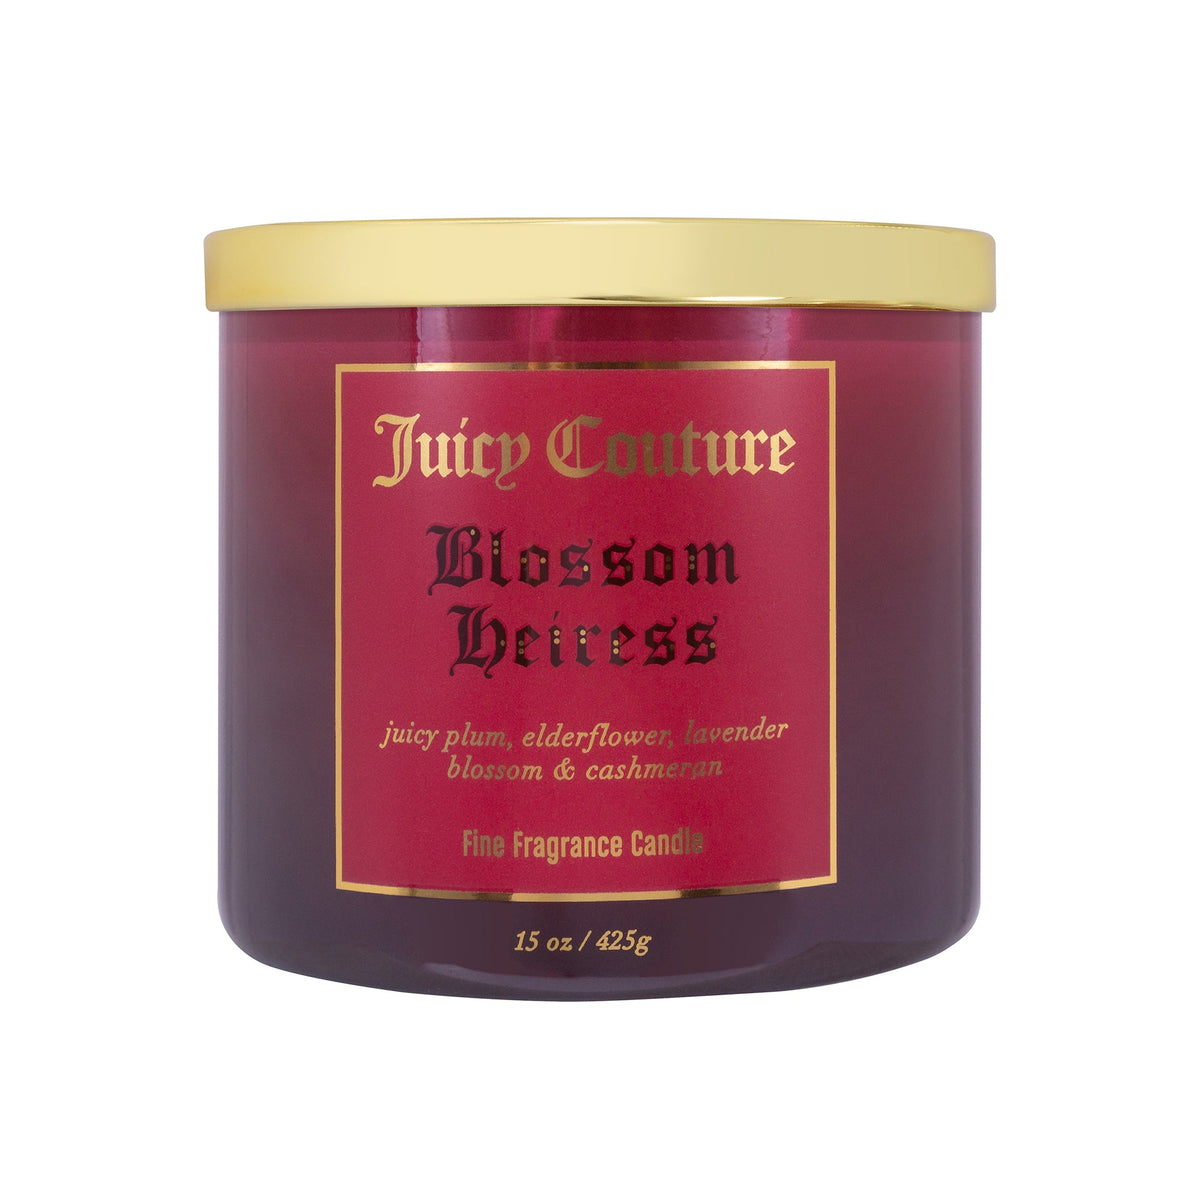 Juicy Couture Blossom Heiress Candle